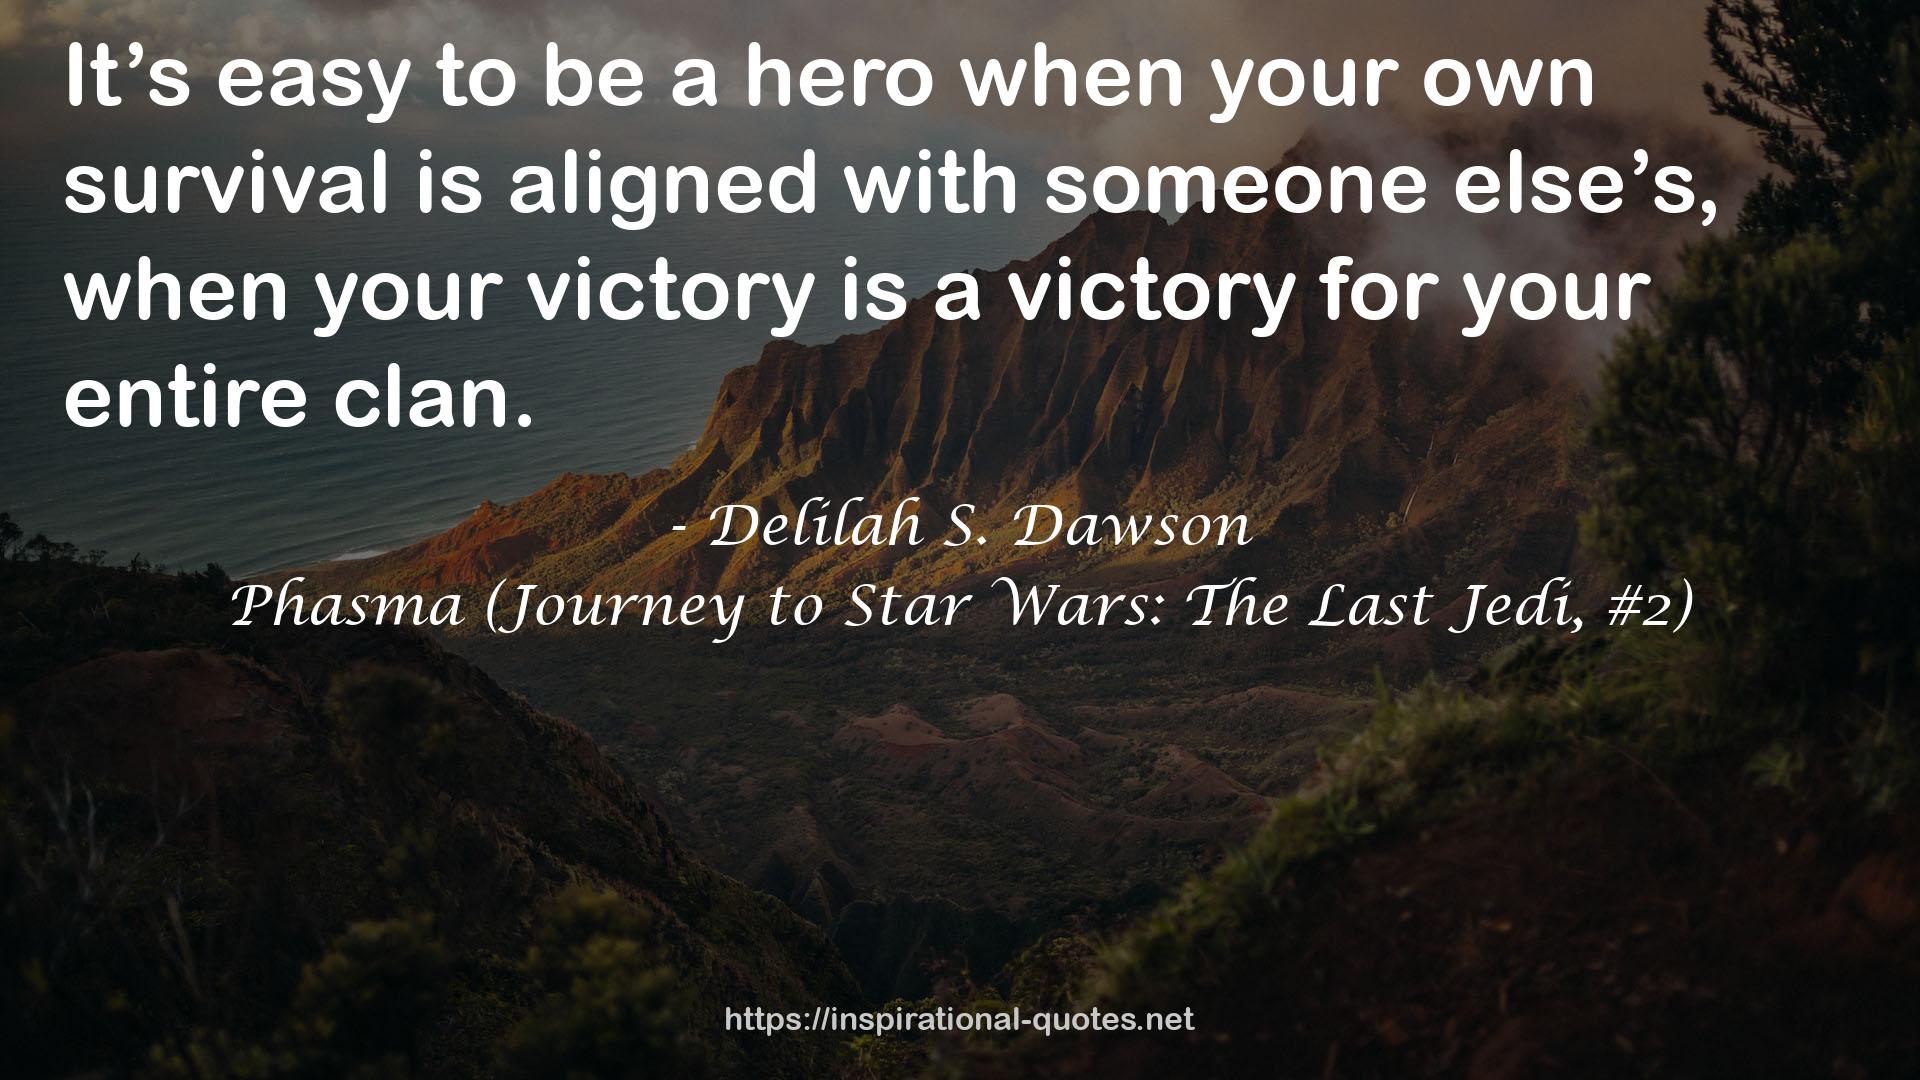 Phasma (Journey to Star Wars: The Last Jedi, #2) QUOTES